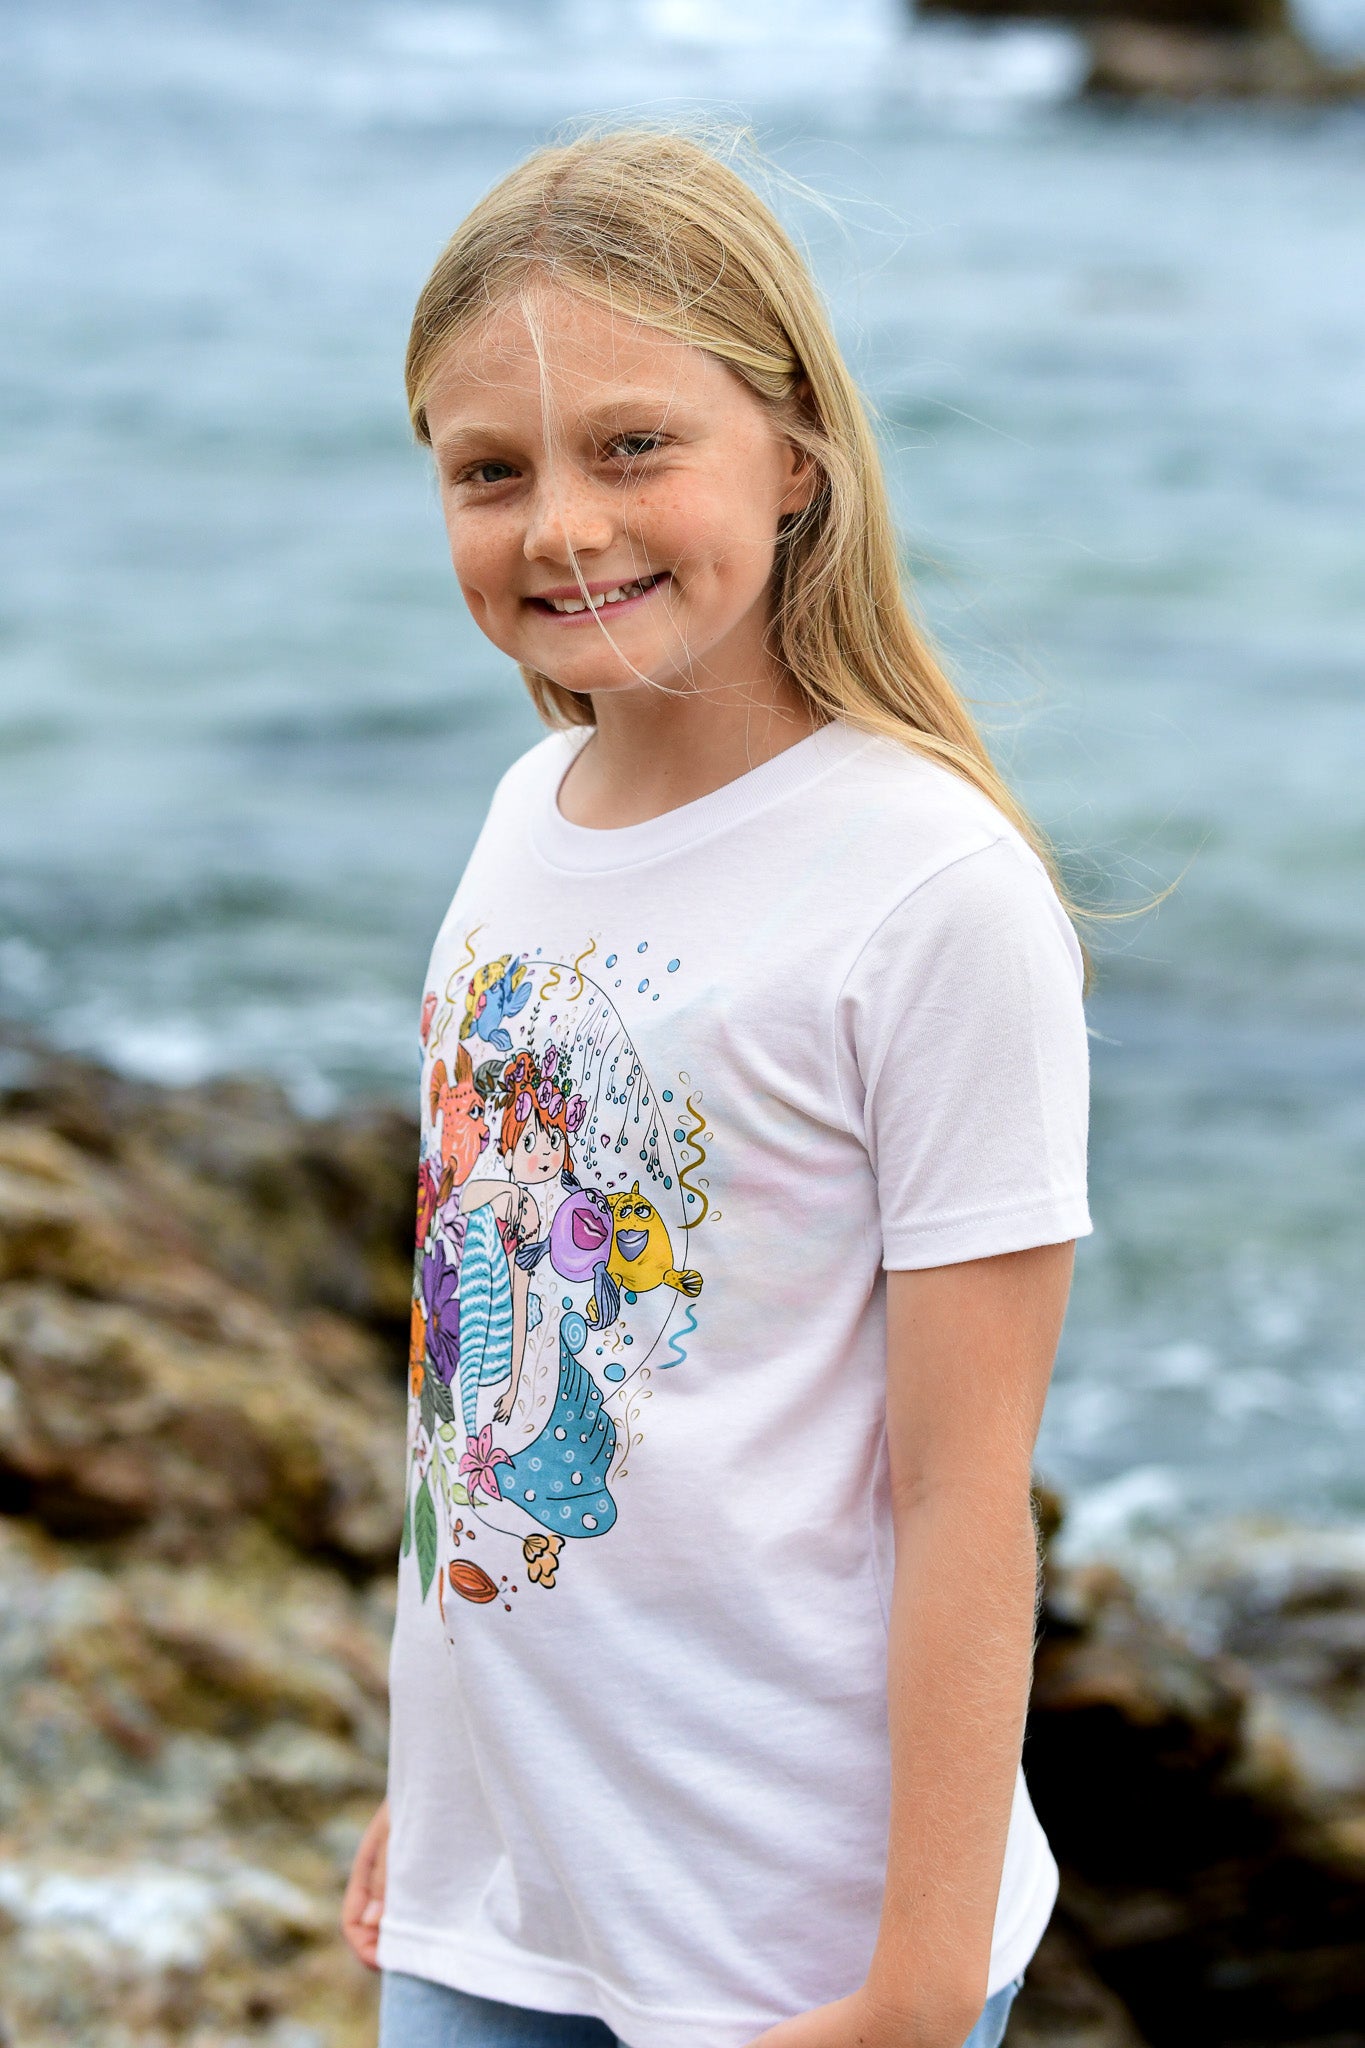 wearable art by North Shore Girls. Graphic tee for kids. Handmade by female artist 